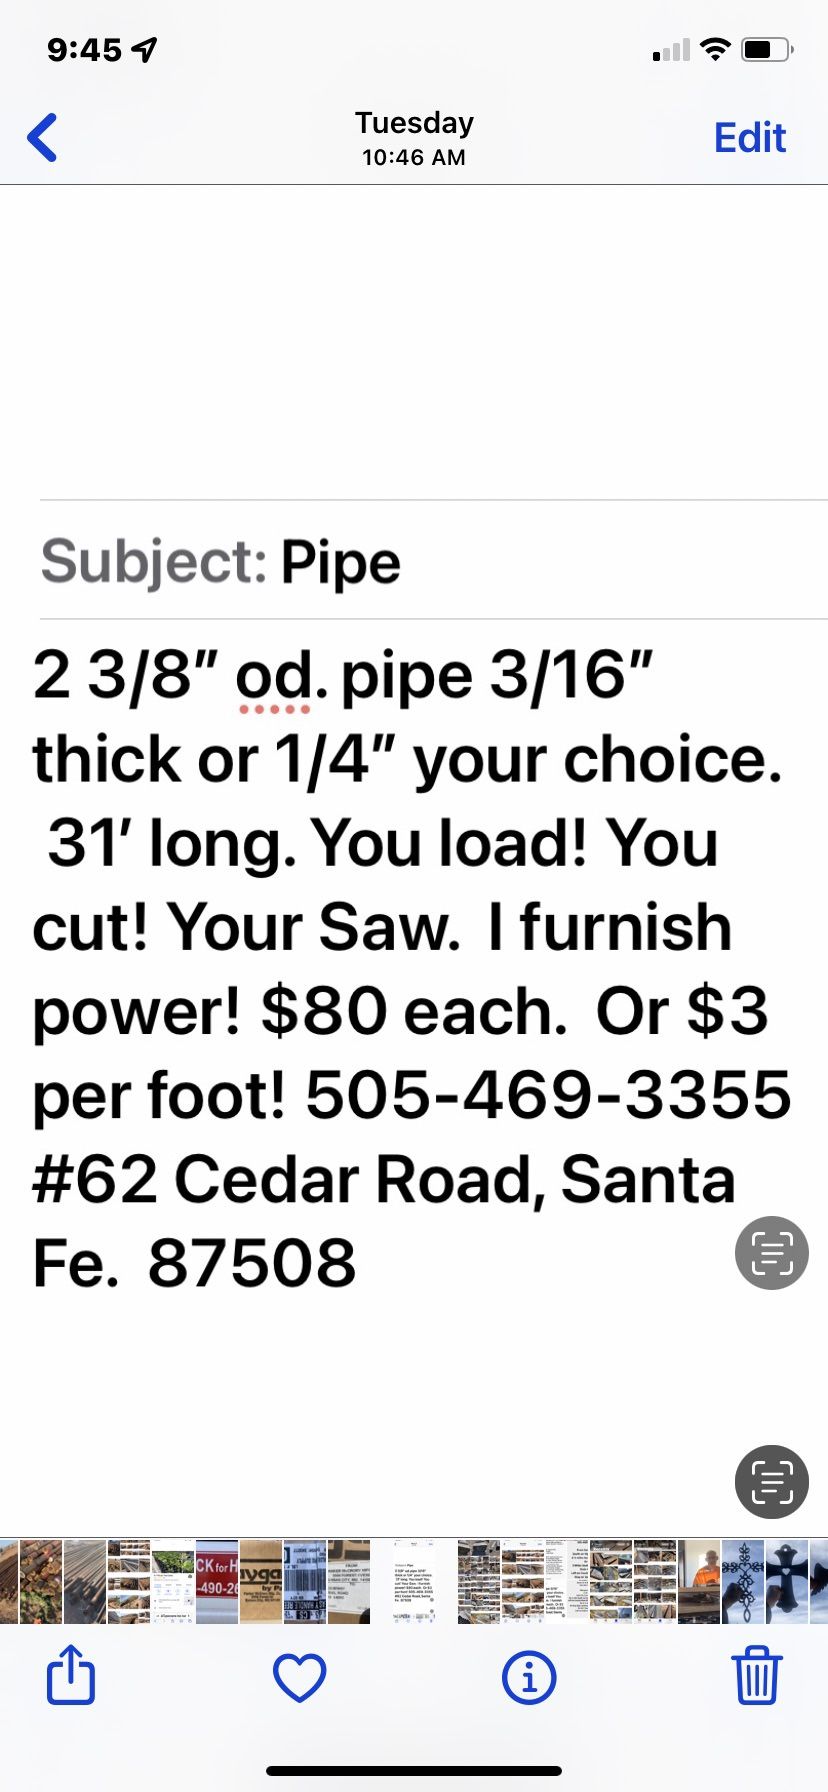 Pipe 505-469-3355